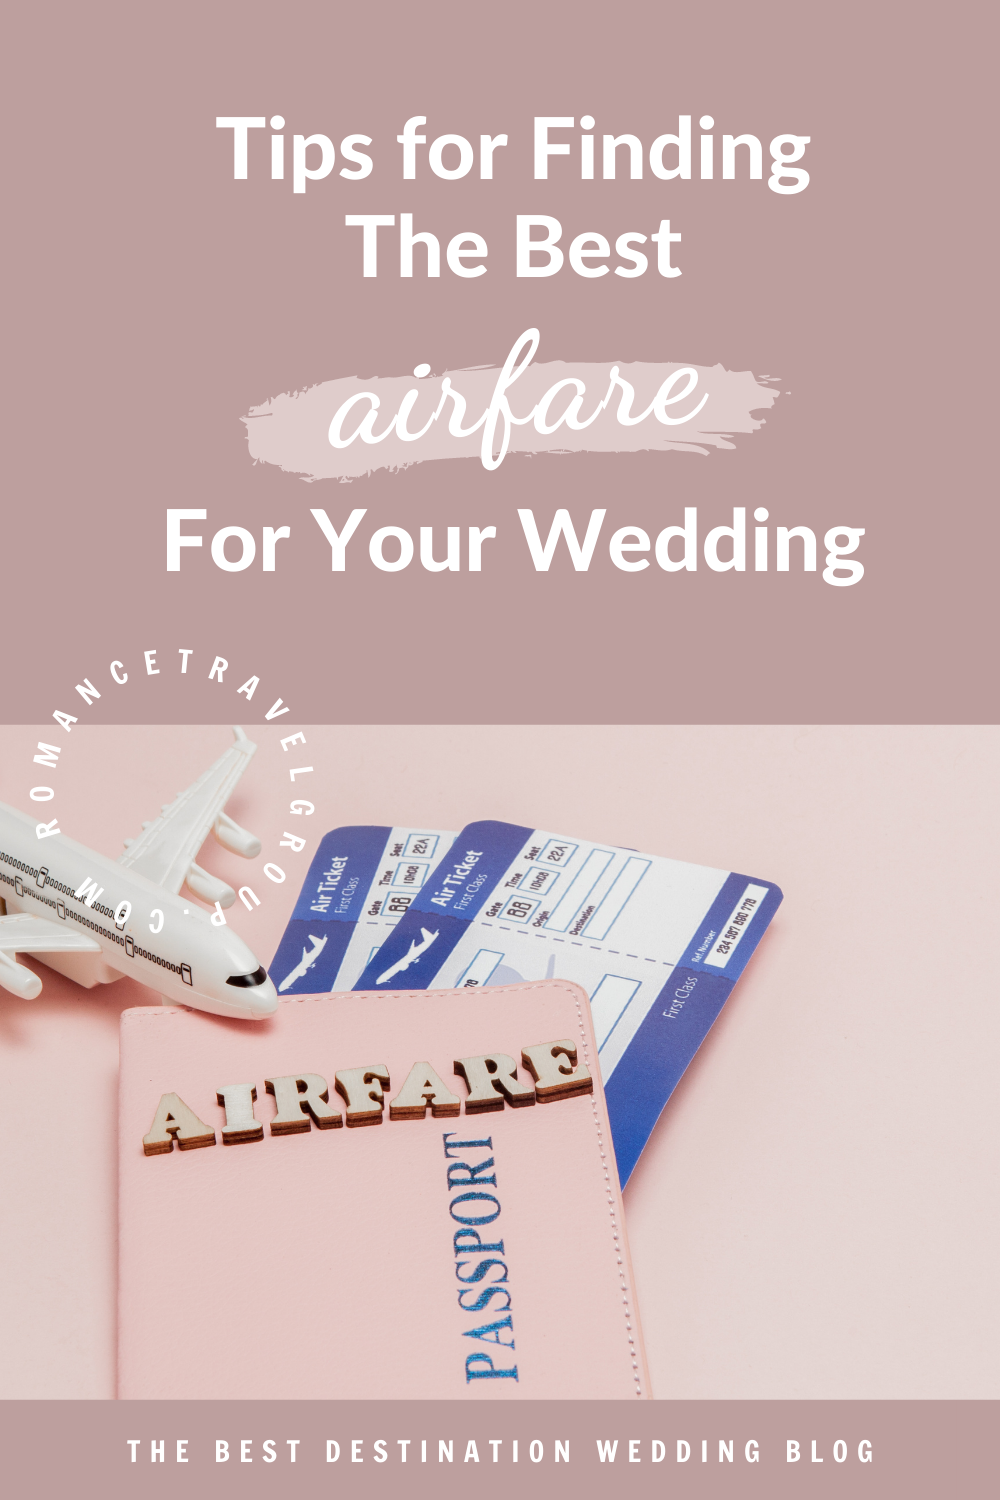 Tips for Finding The Best Airfare for Your Wedding